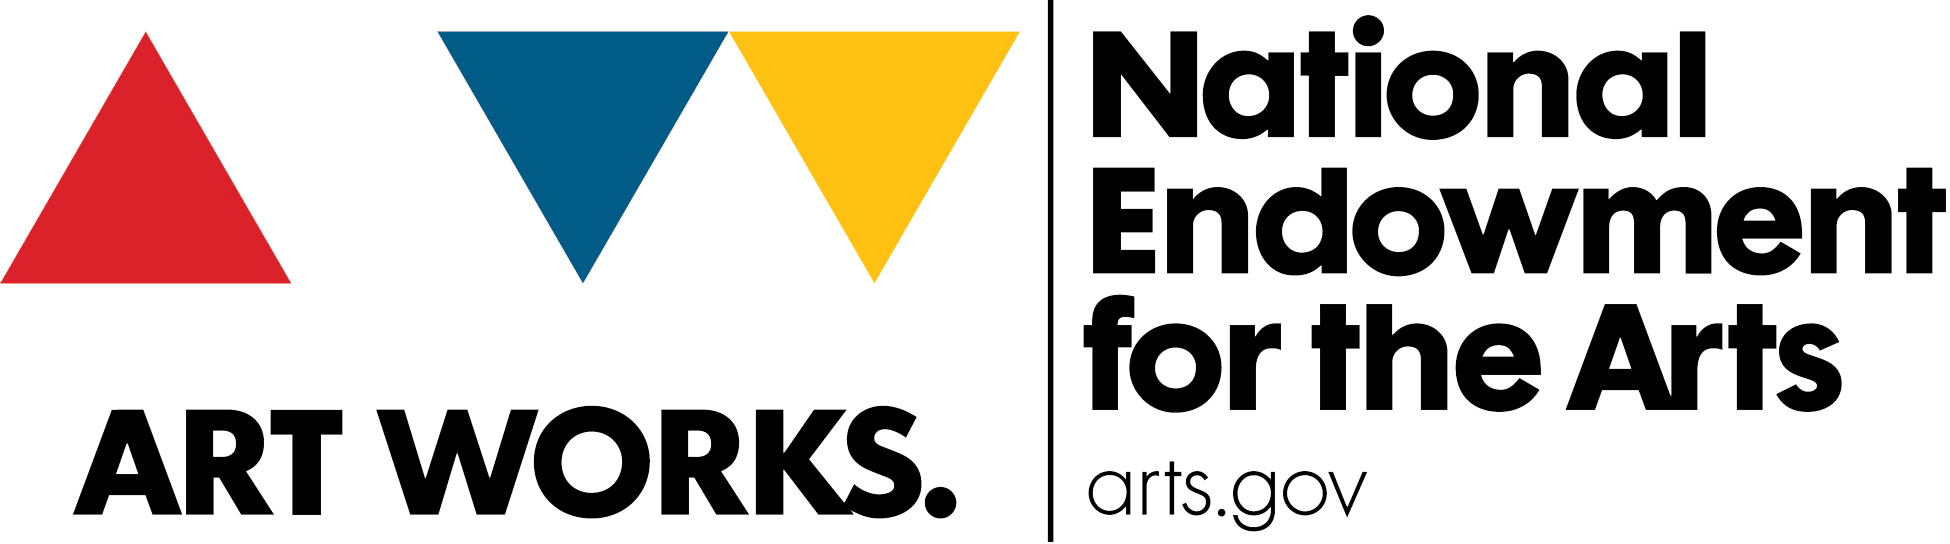 Art Works and National Endowment for the Arts joint logo